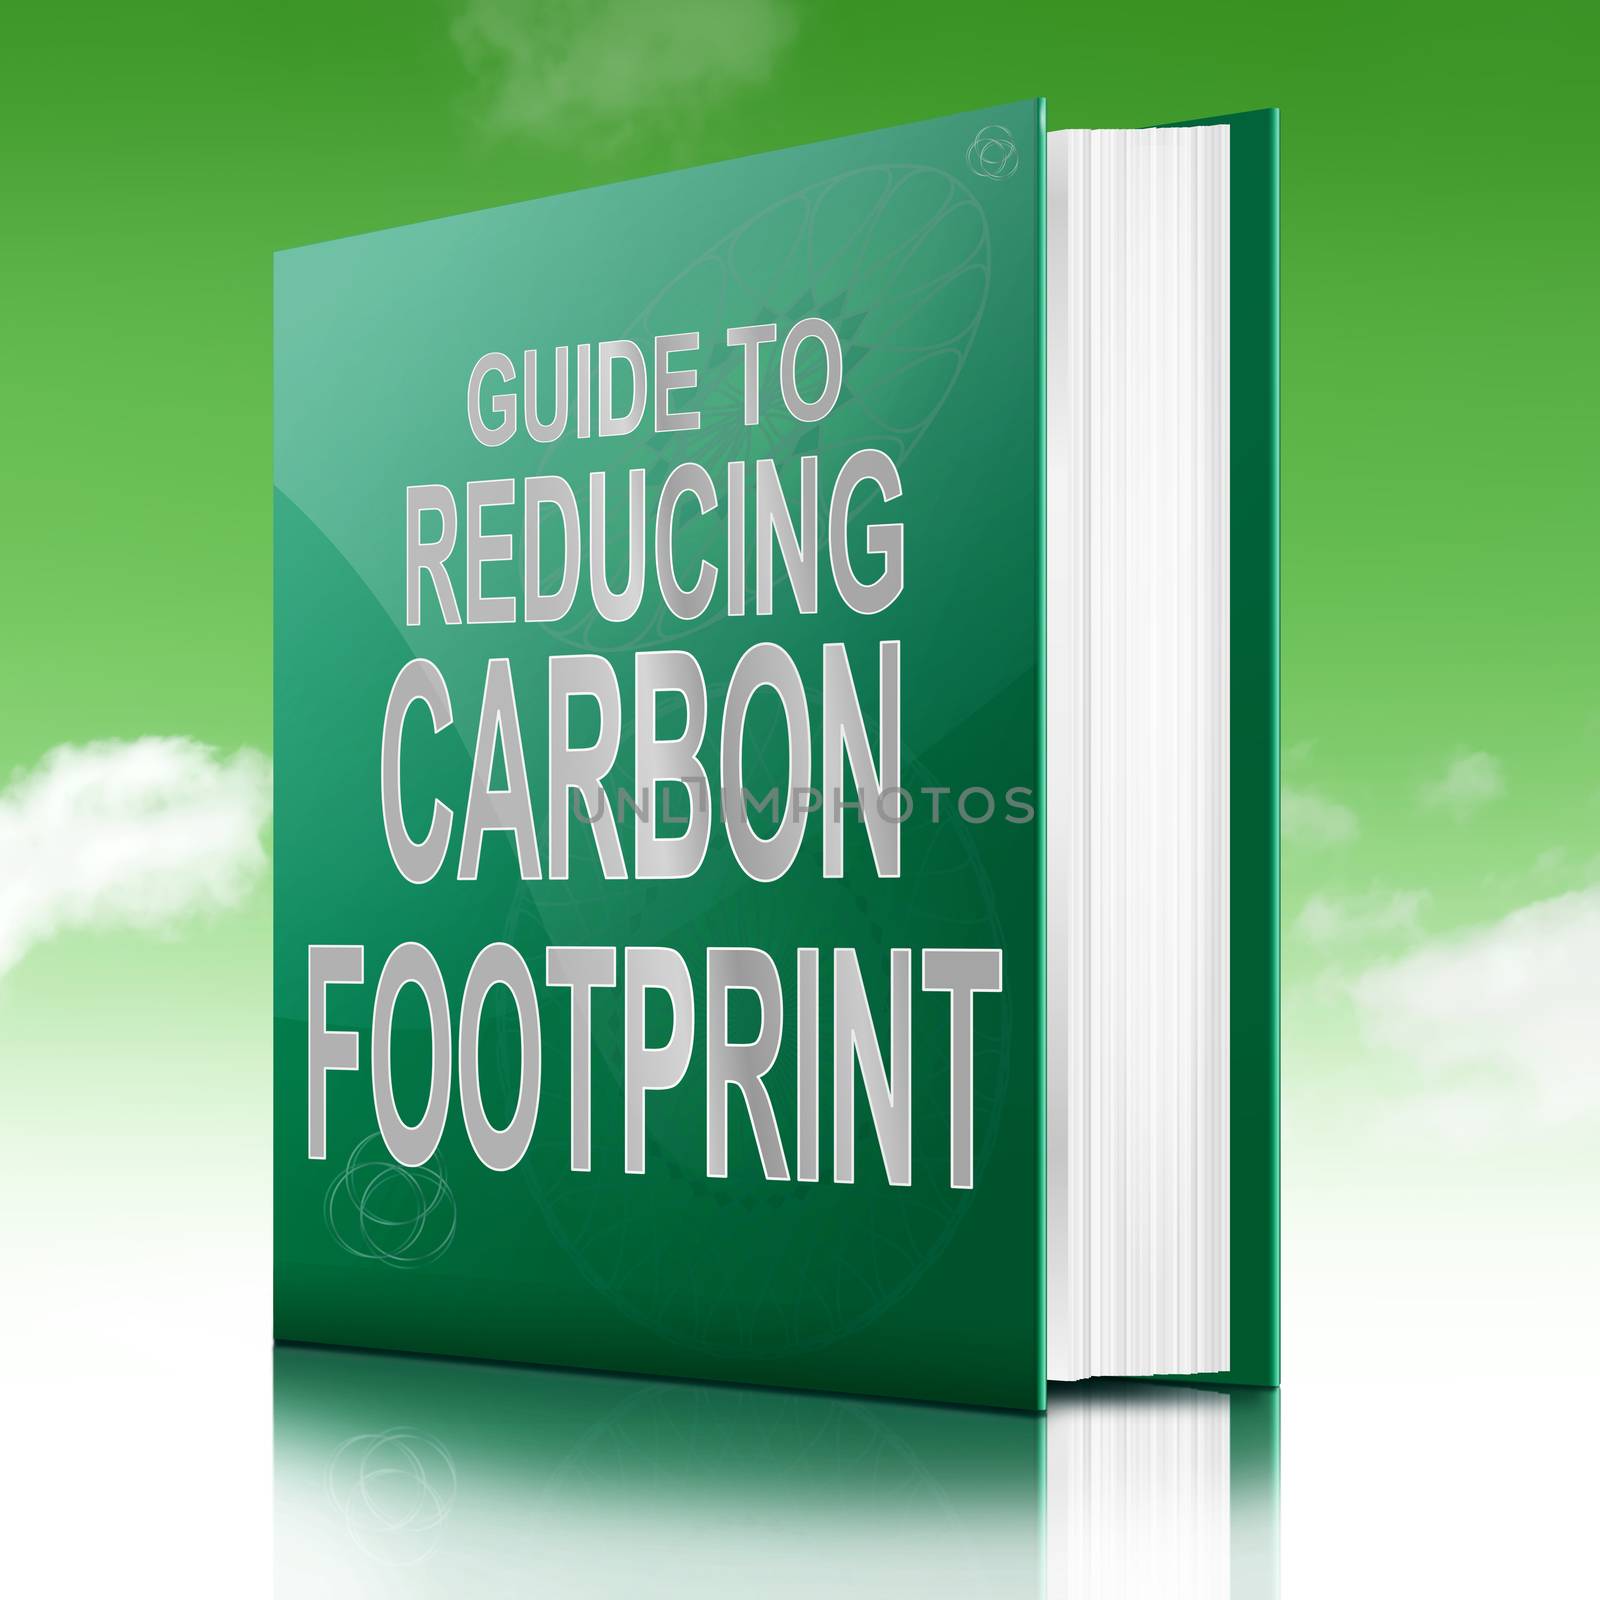 Illustration depicting a book with a carbon footprint concept title. Sky background.